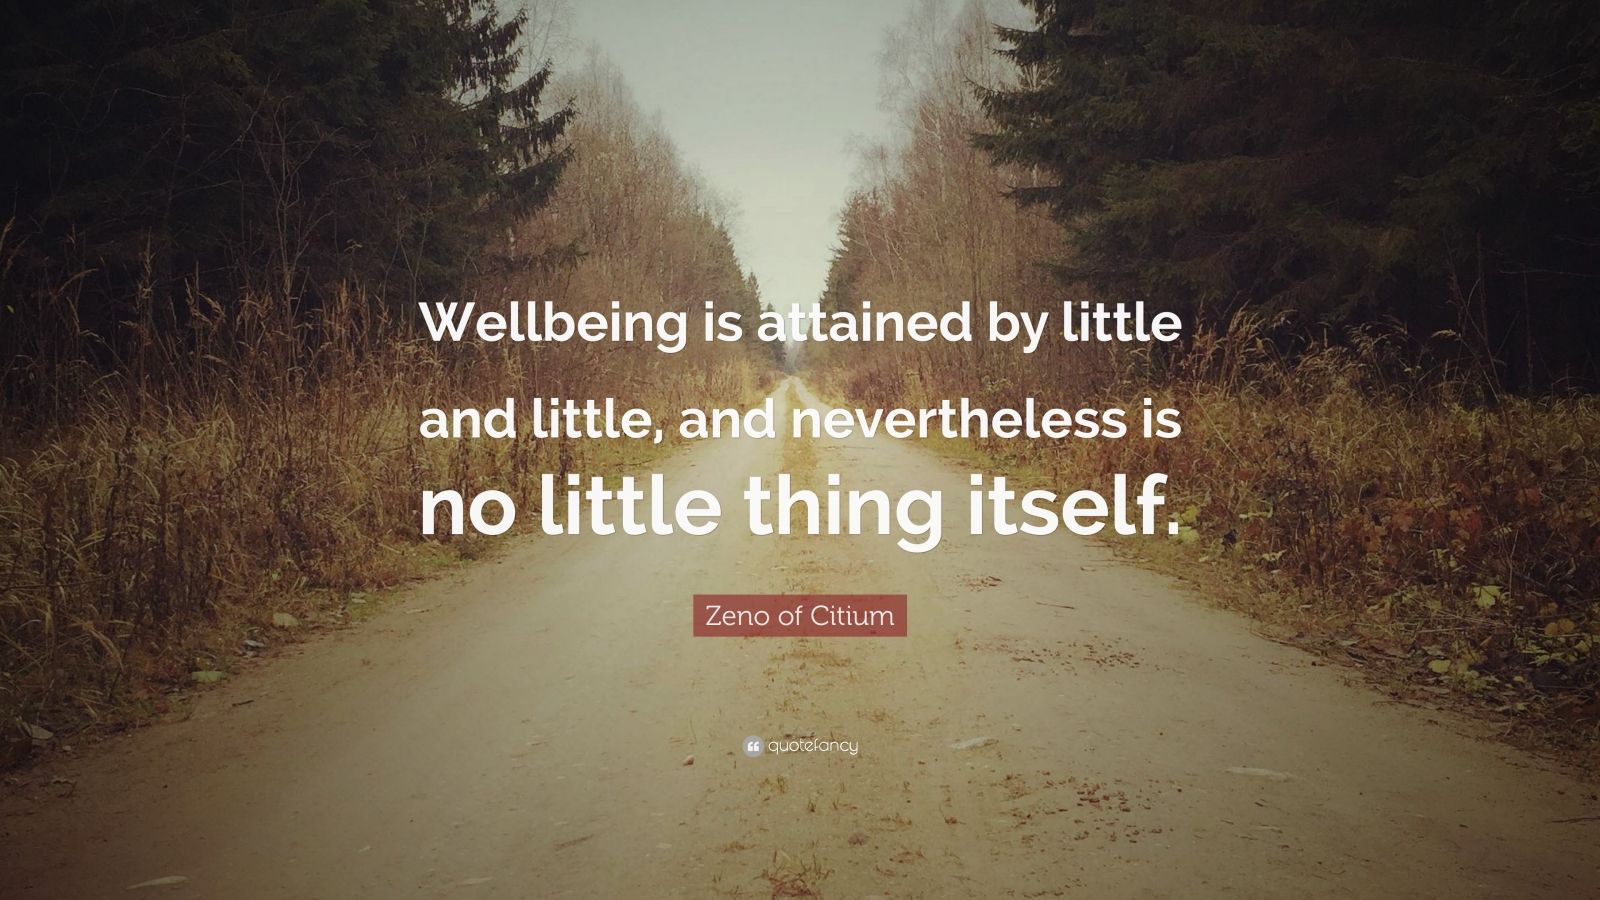 Zeno of Citium Quote: “Wellbeing is attained by little and little, and